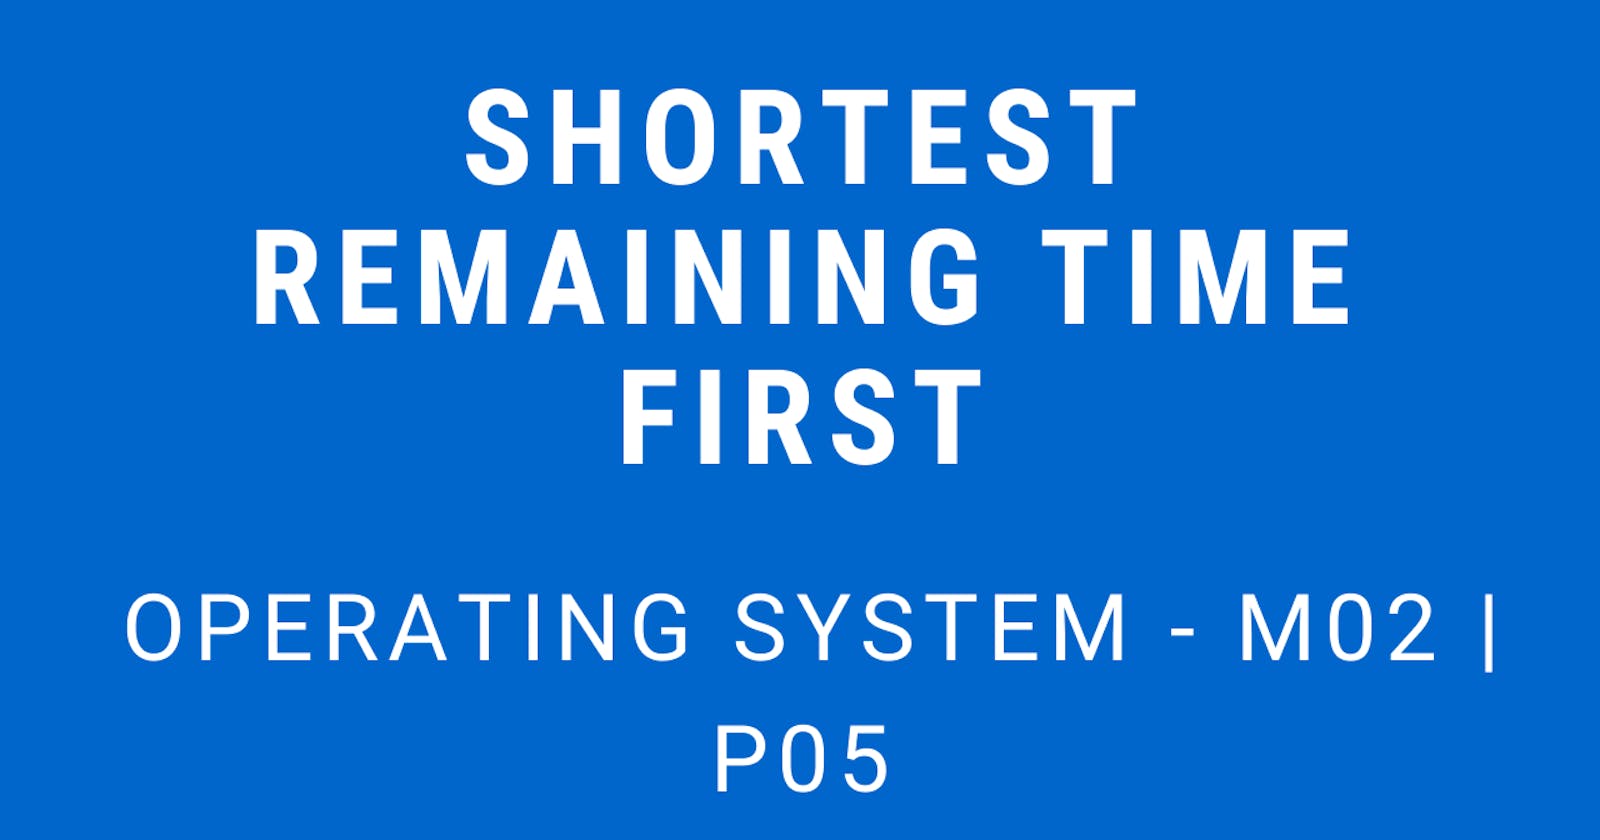 Shortest Remaining Time First | Operating System - M02 P05